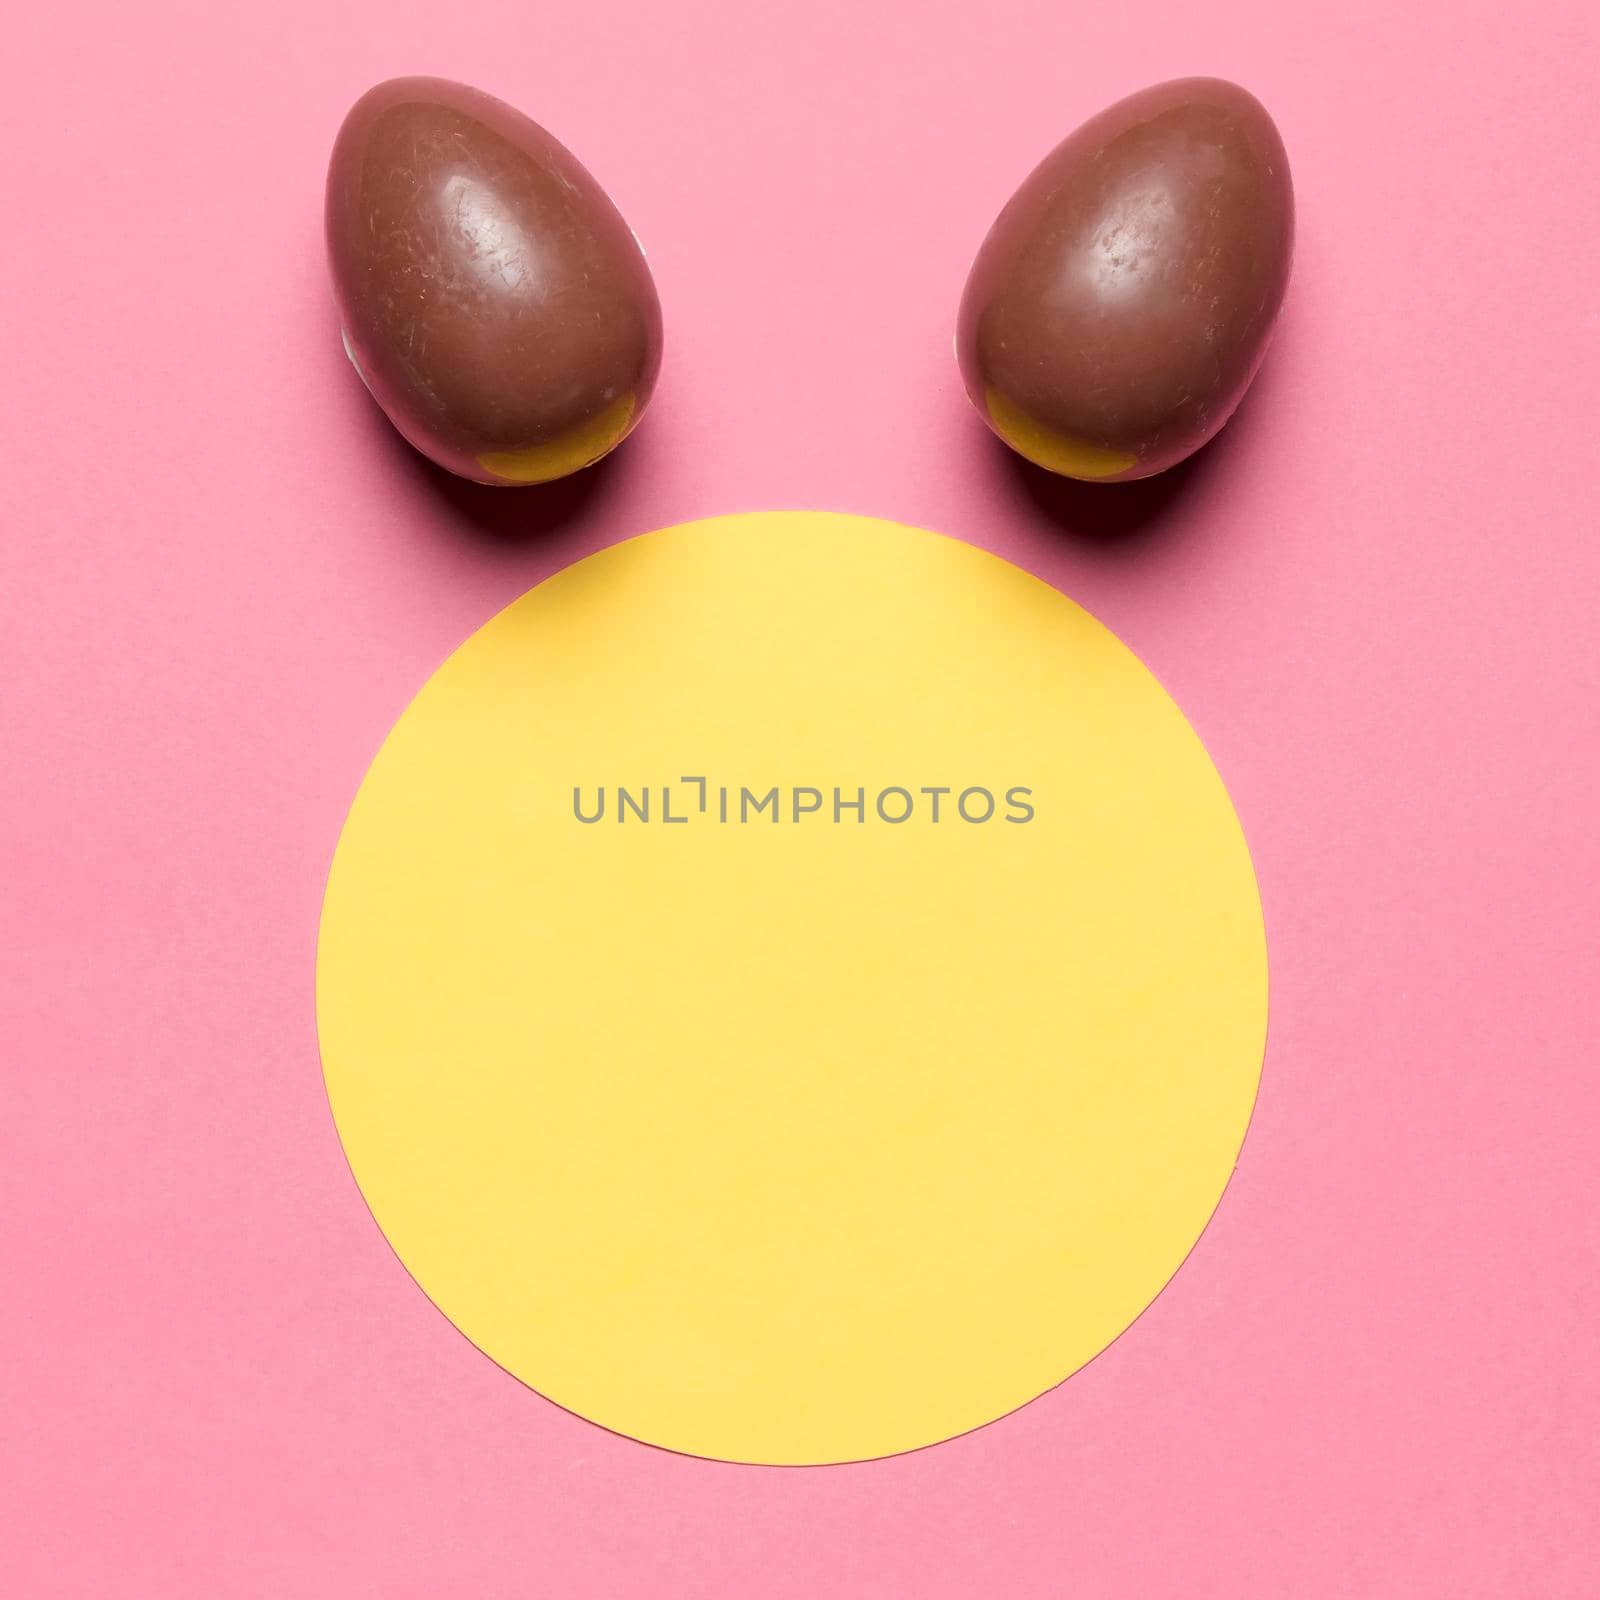 easter eggs like bunny ear s round paper blank frame against pink backdrop by Zahard